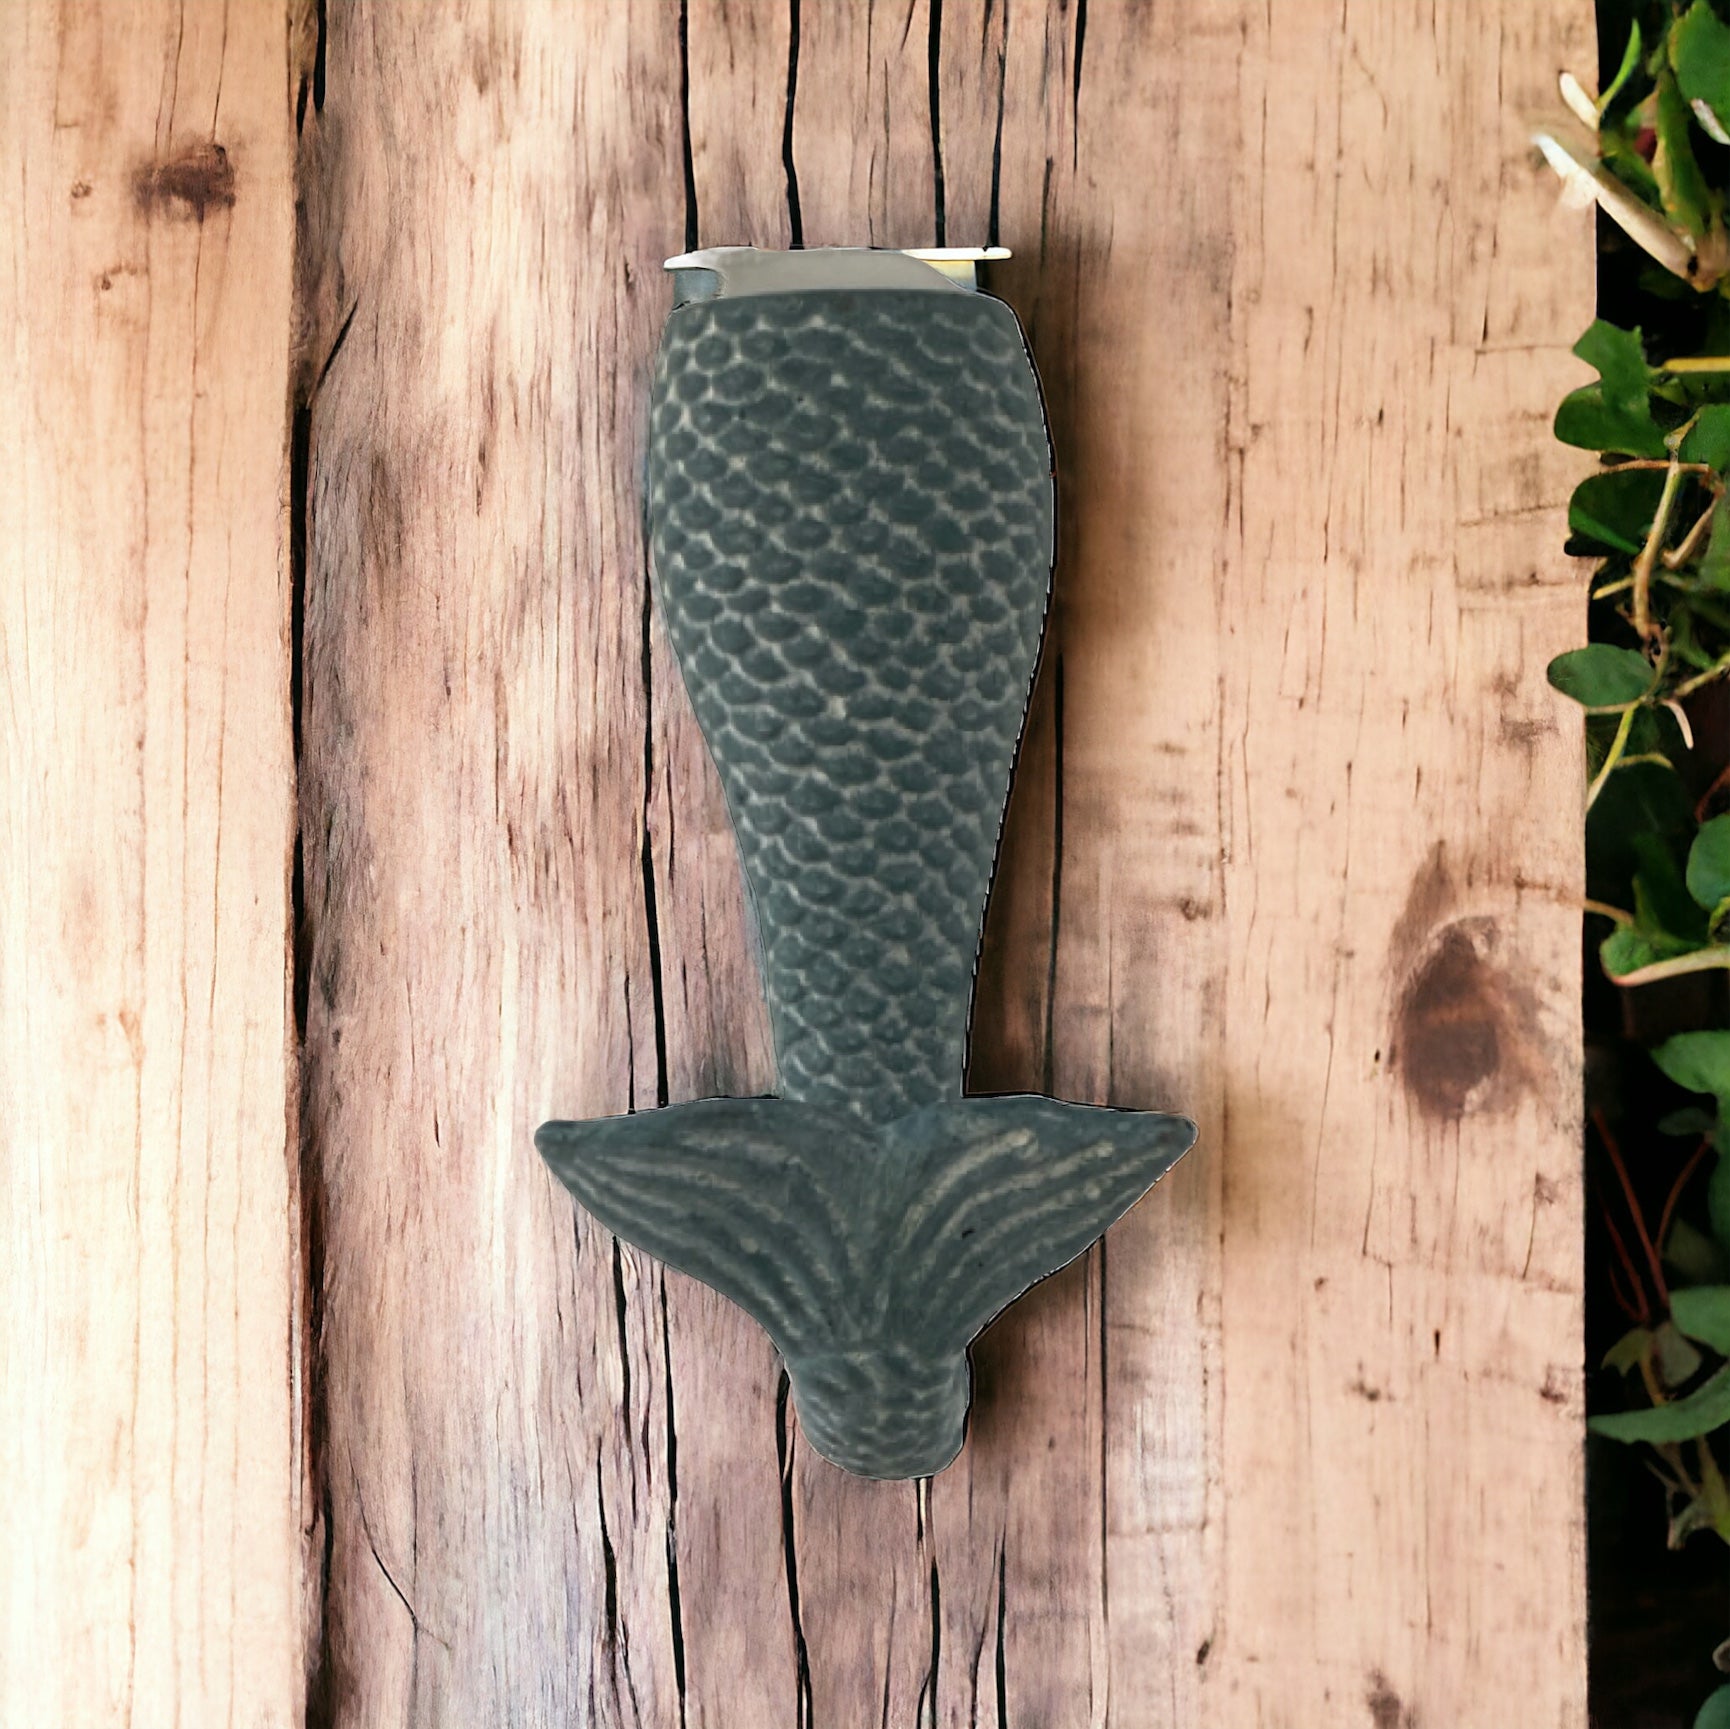 Hook Mermaid Tail Blue Beach - The Renmy Store Homewares & Gifts 